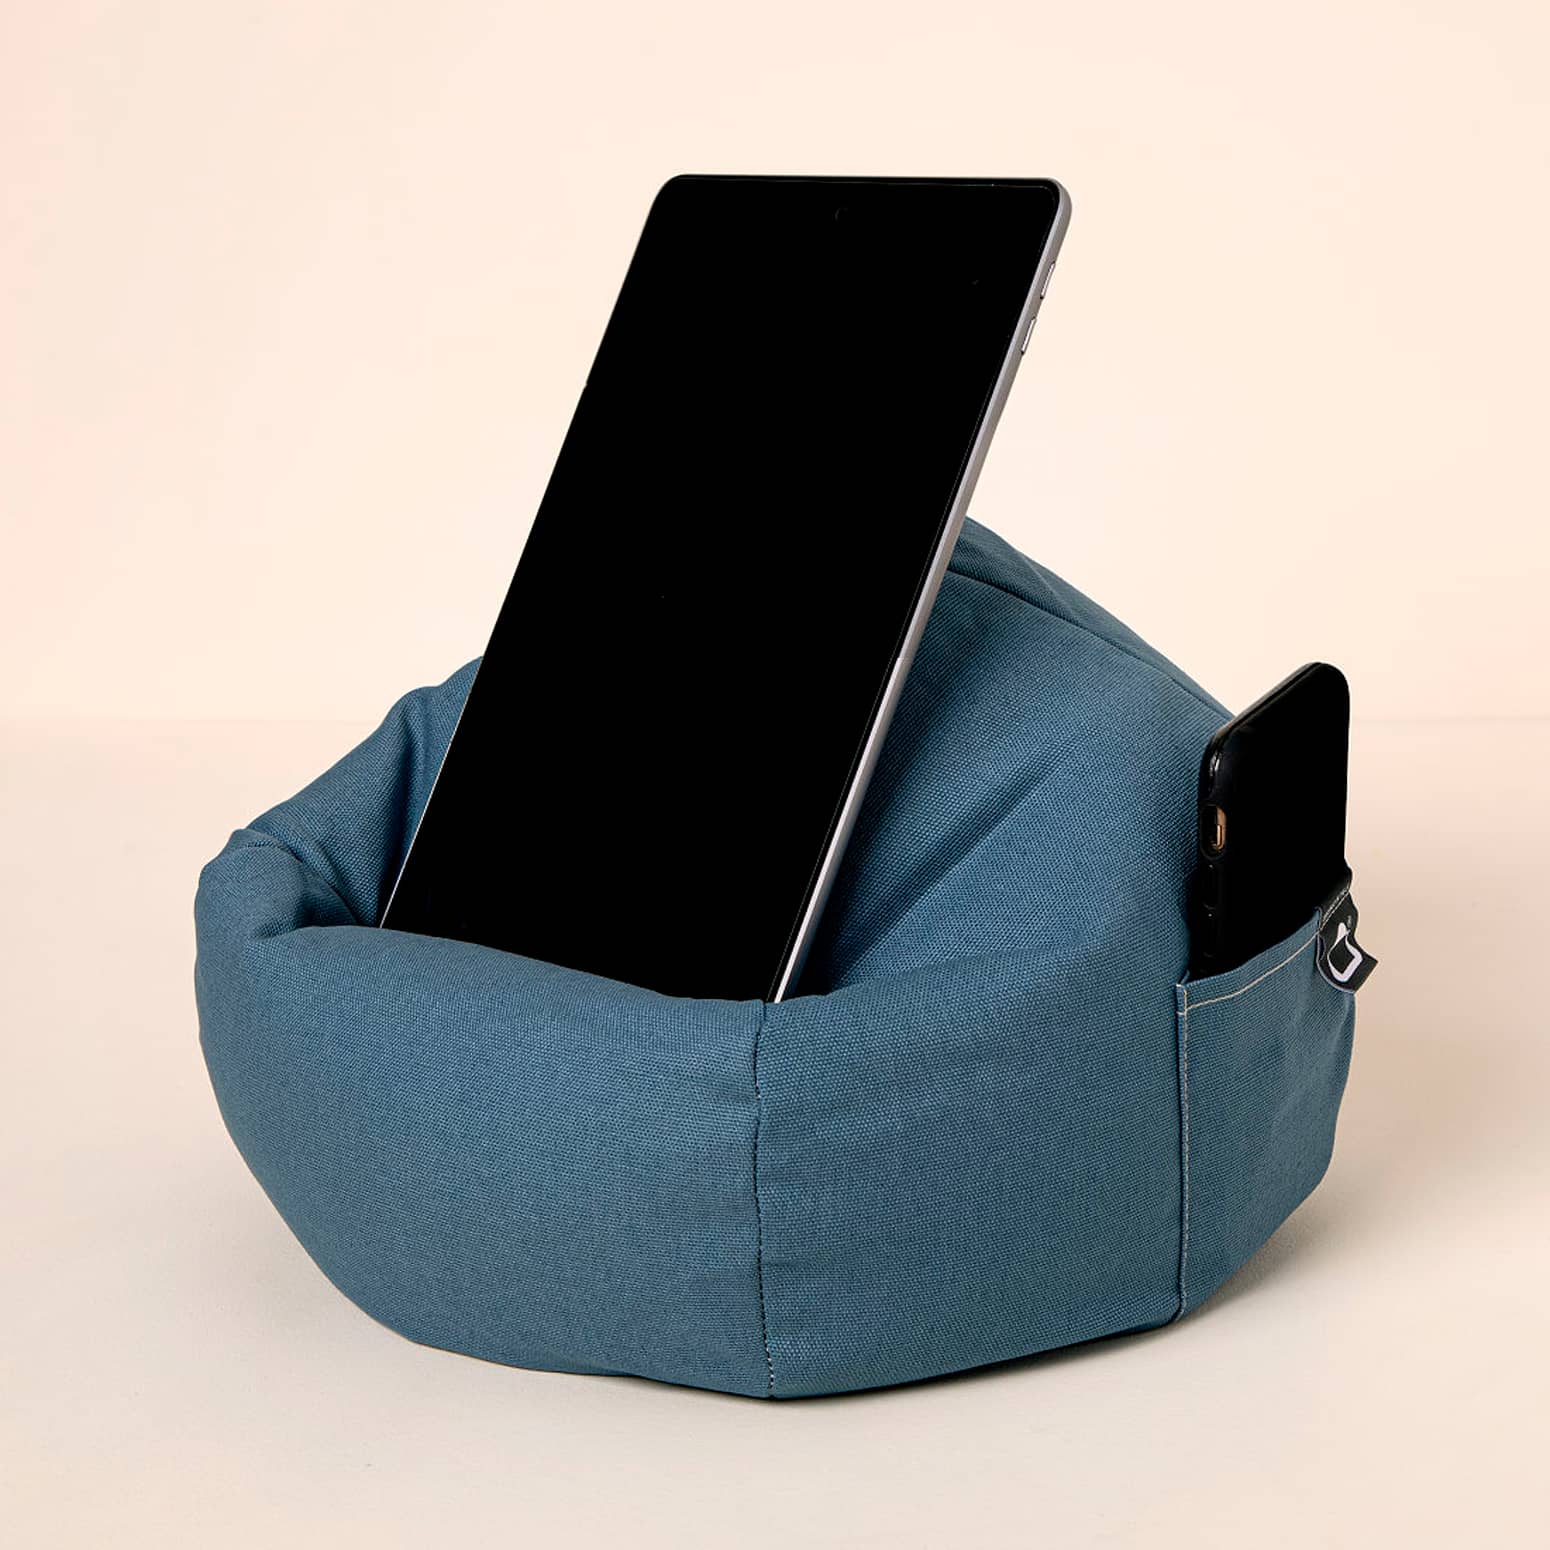 iBeani - Tablet, Phone, eReader, and Book Holding Beanbag Chair